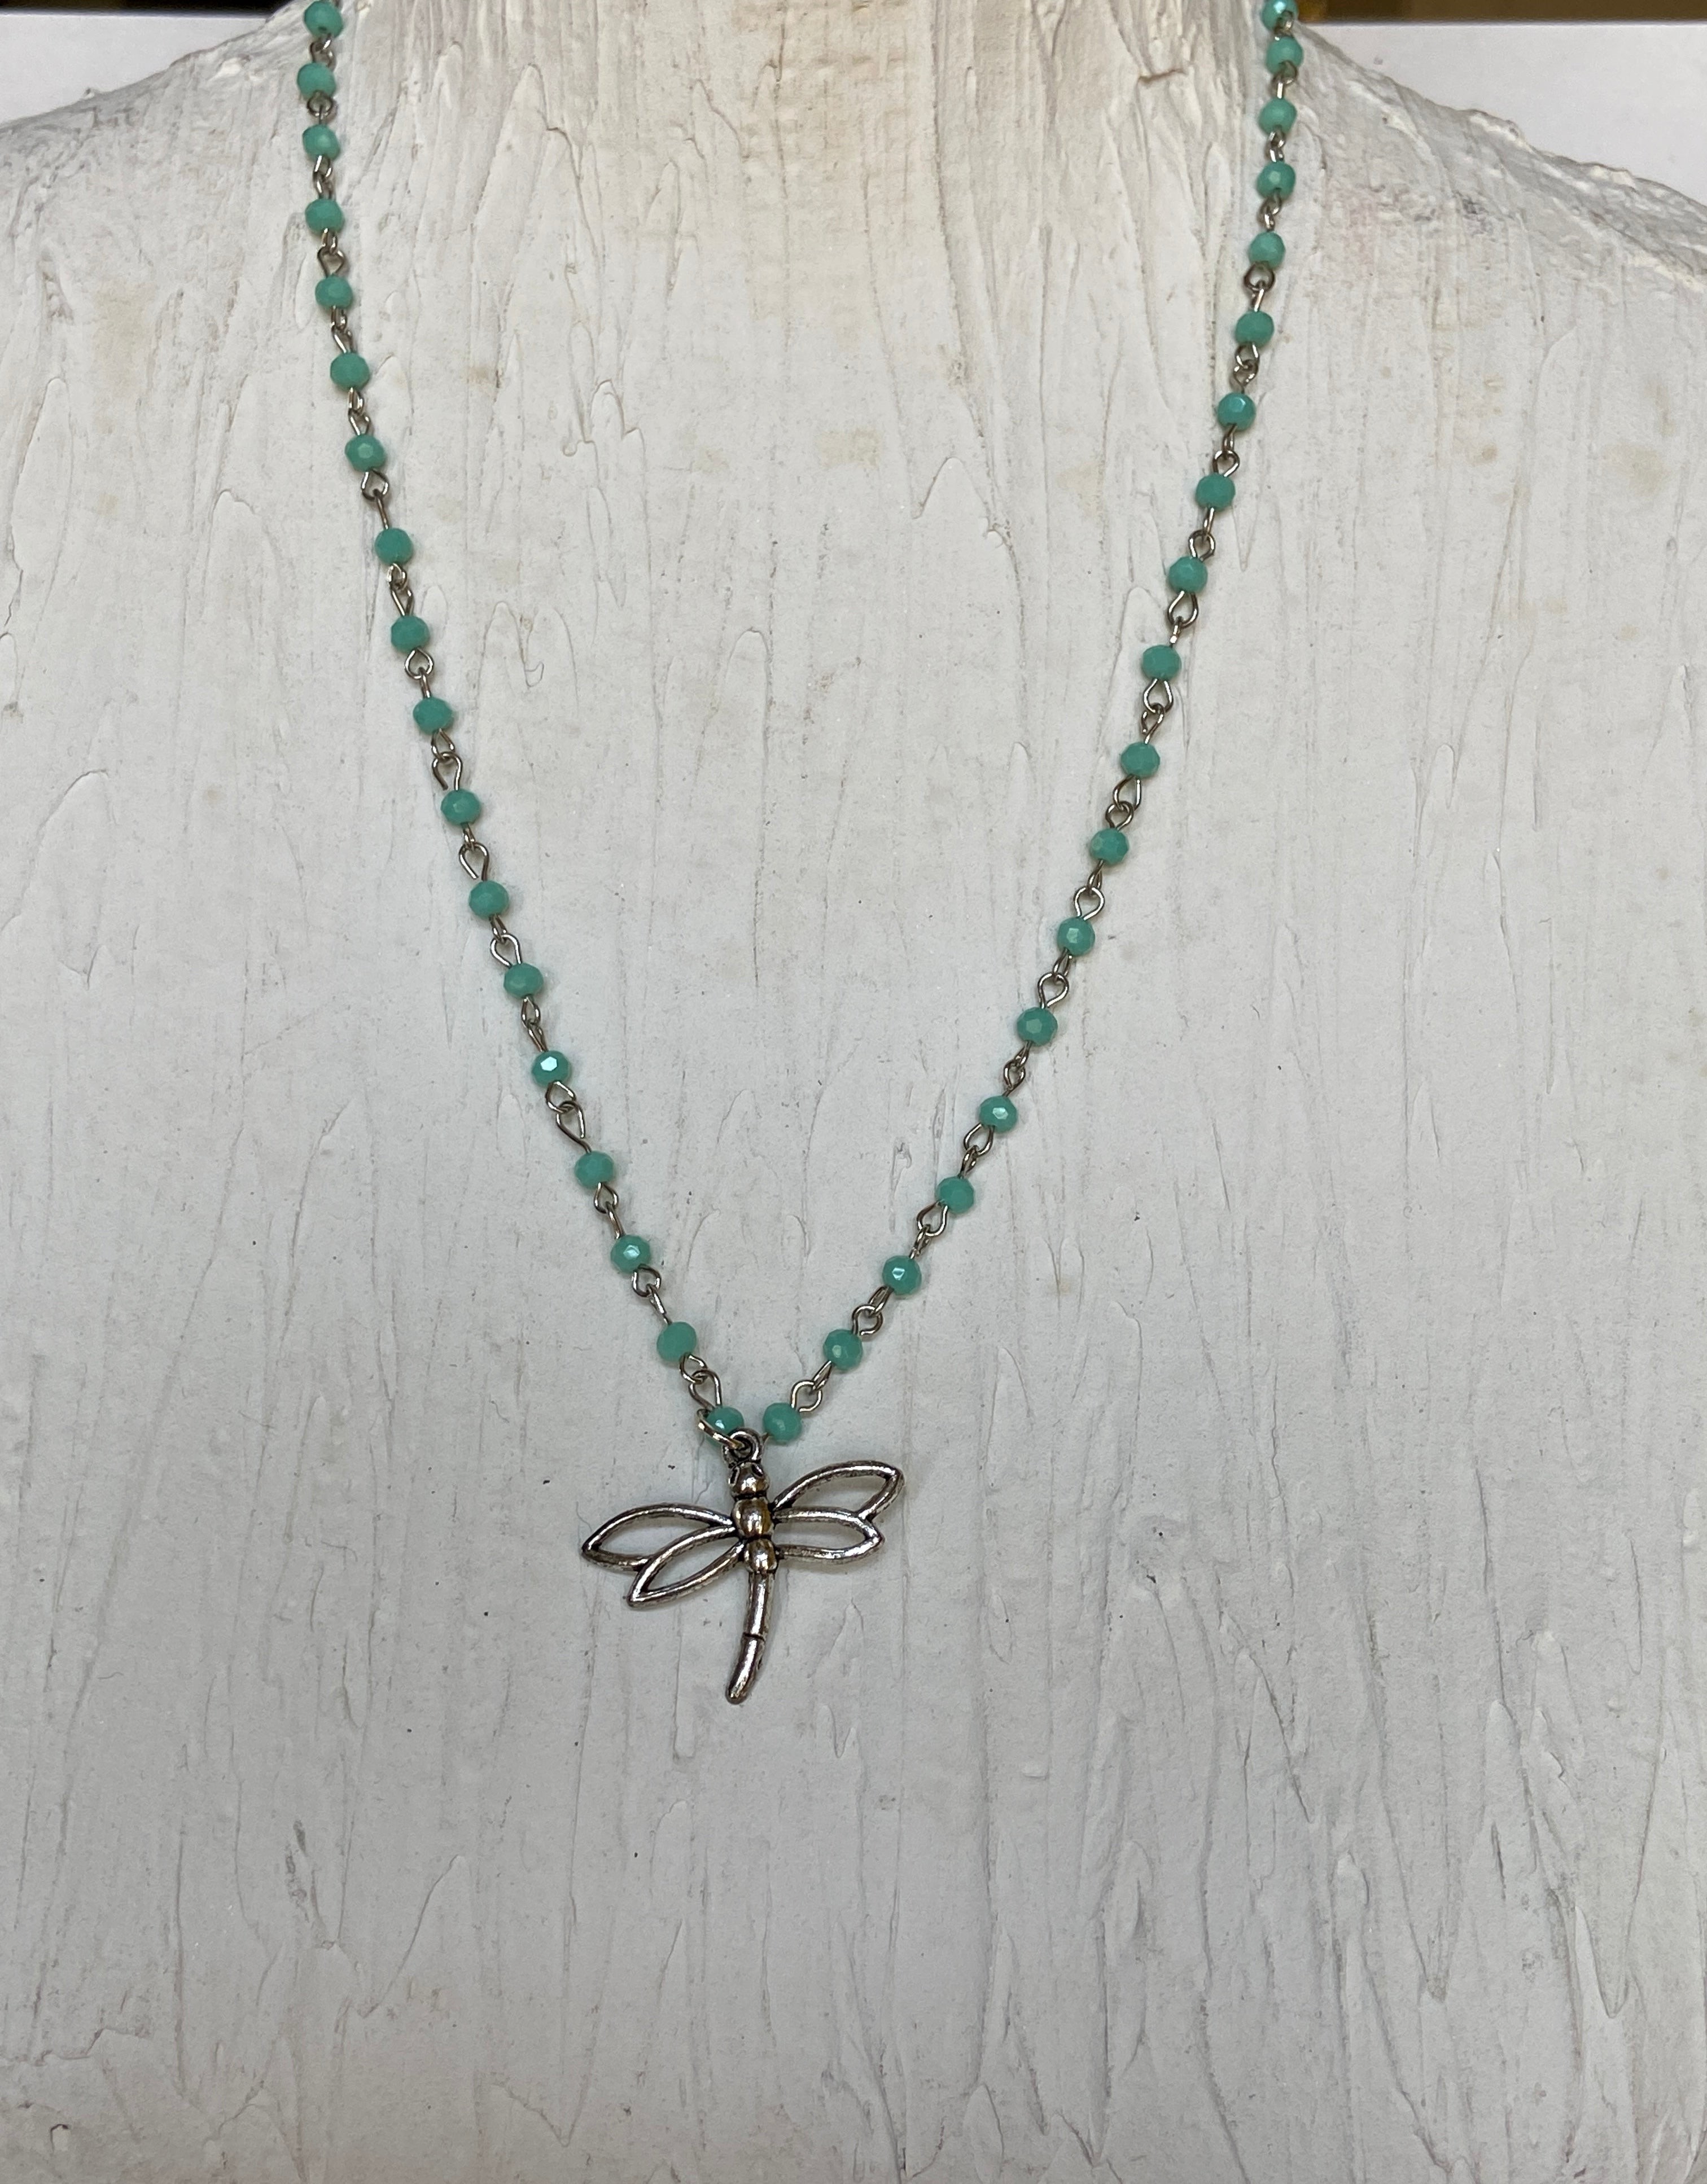 Dragonfly necklace